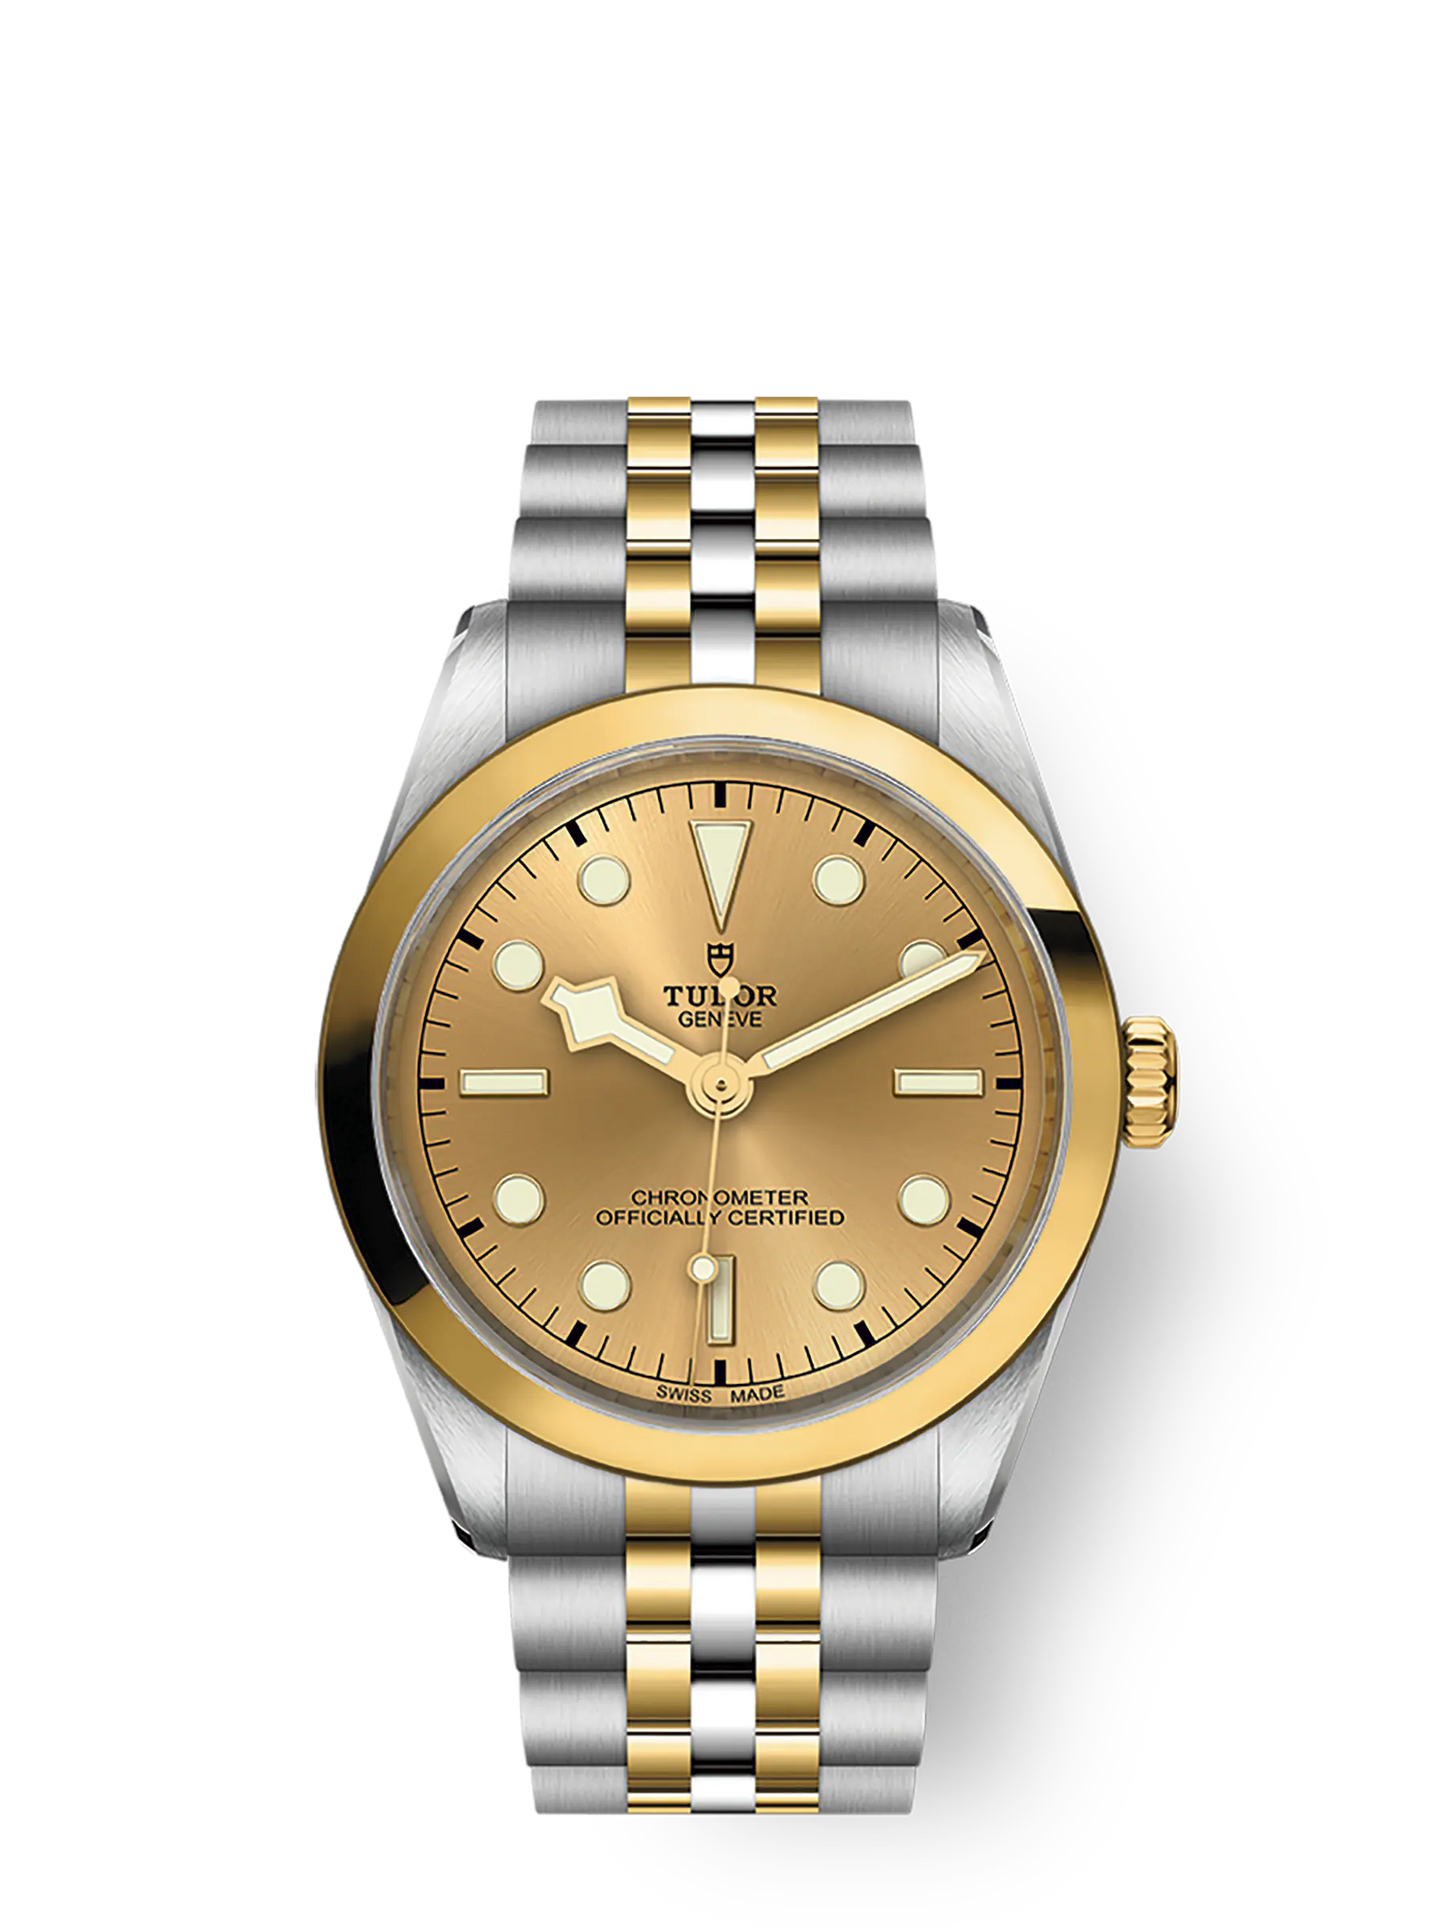 Tudor Black Bay 36 S&G, 316L Stainless Steel and 18k Yellow Gold, Ref# M79643-0005